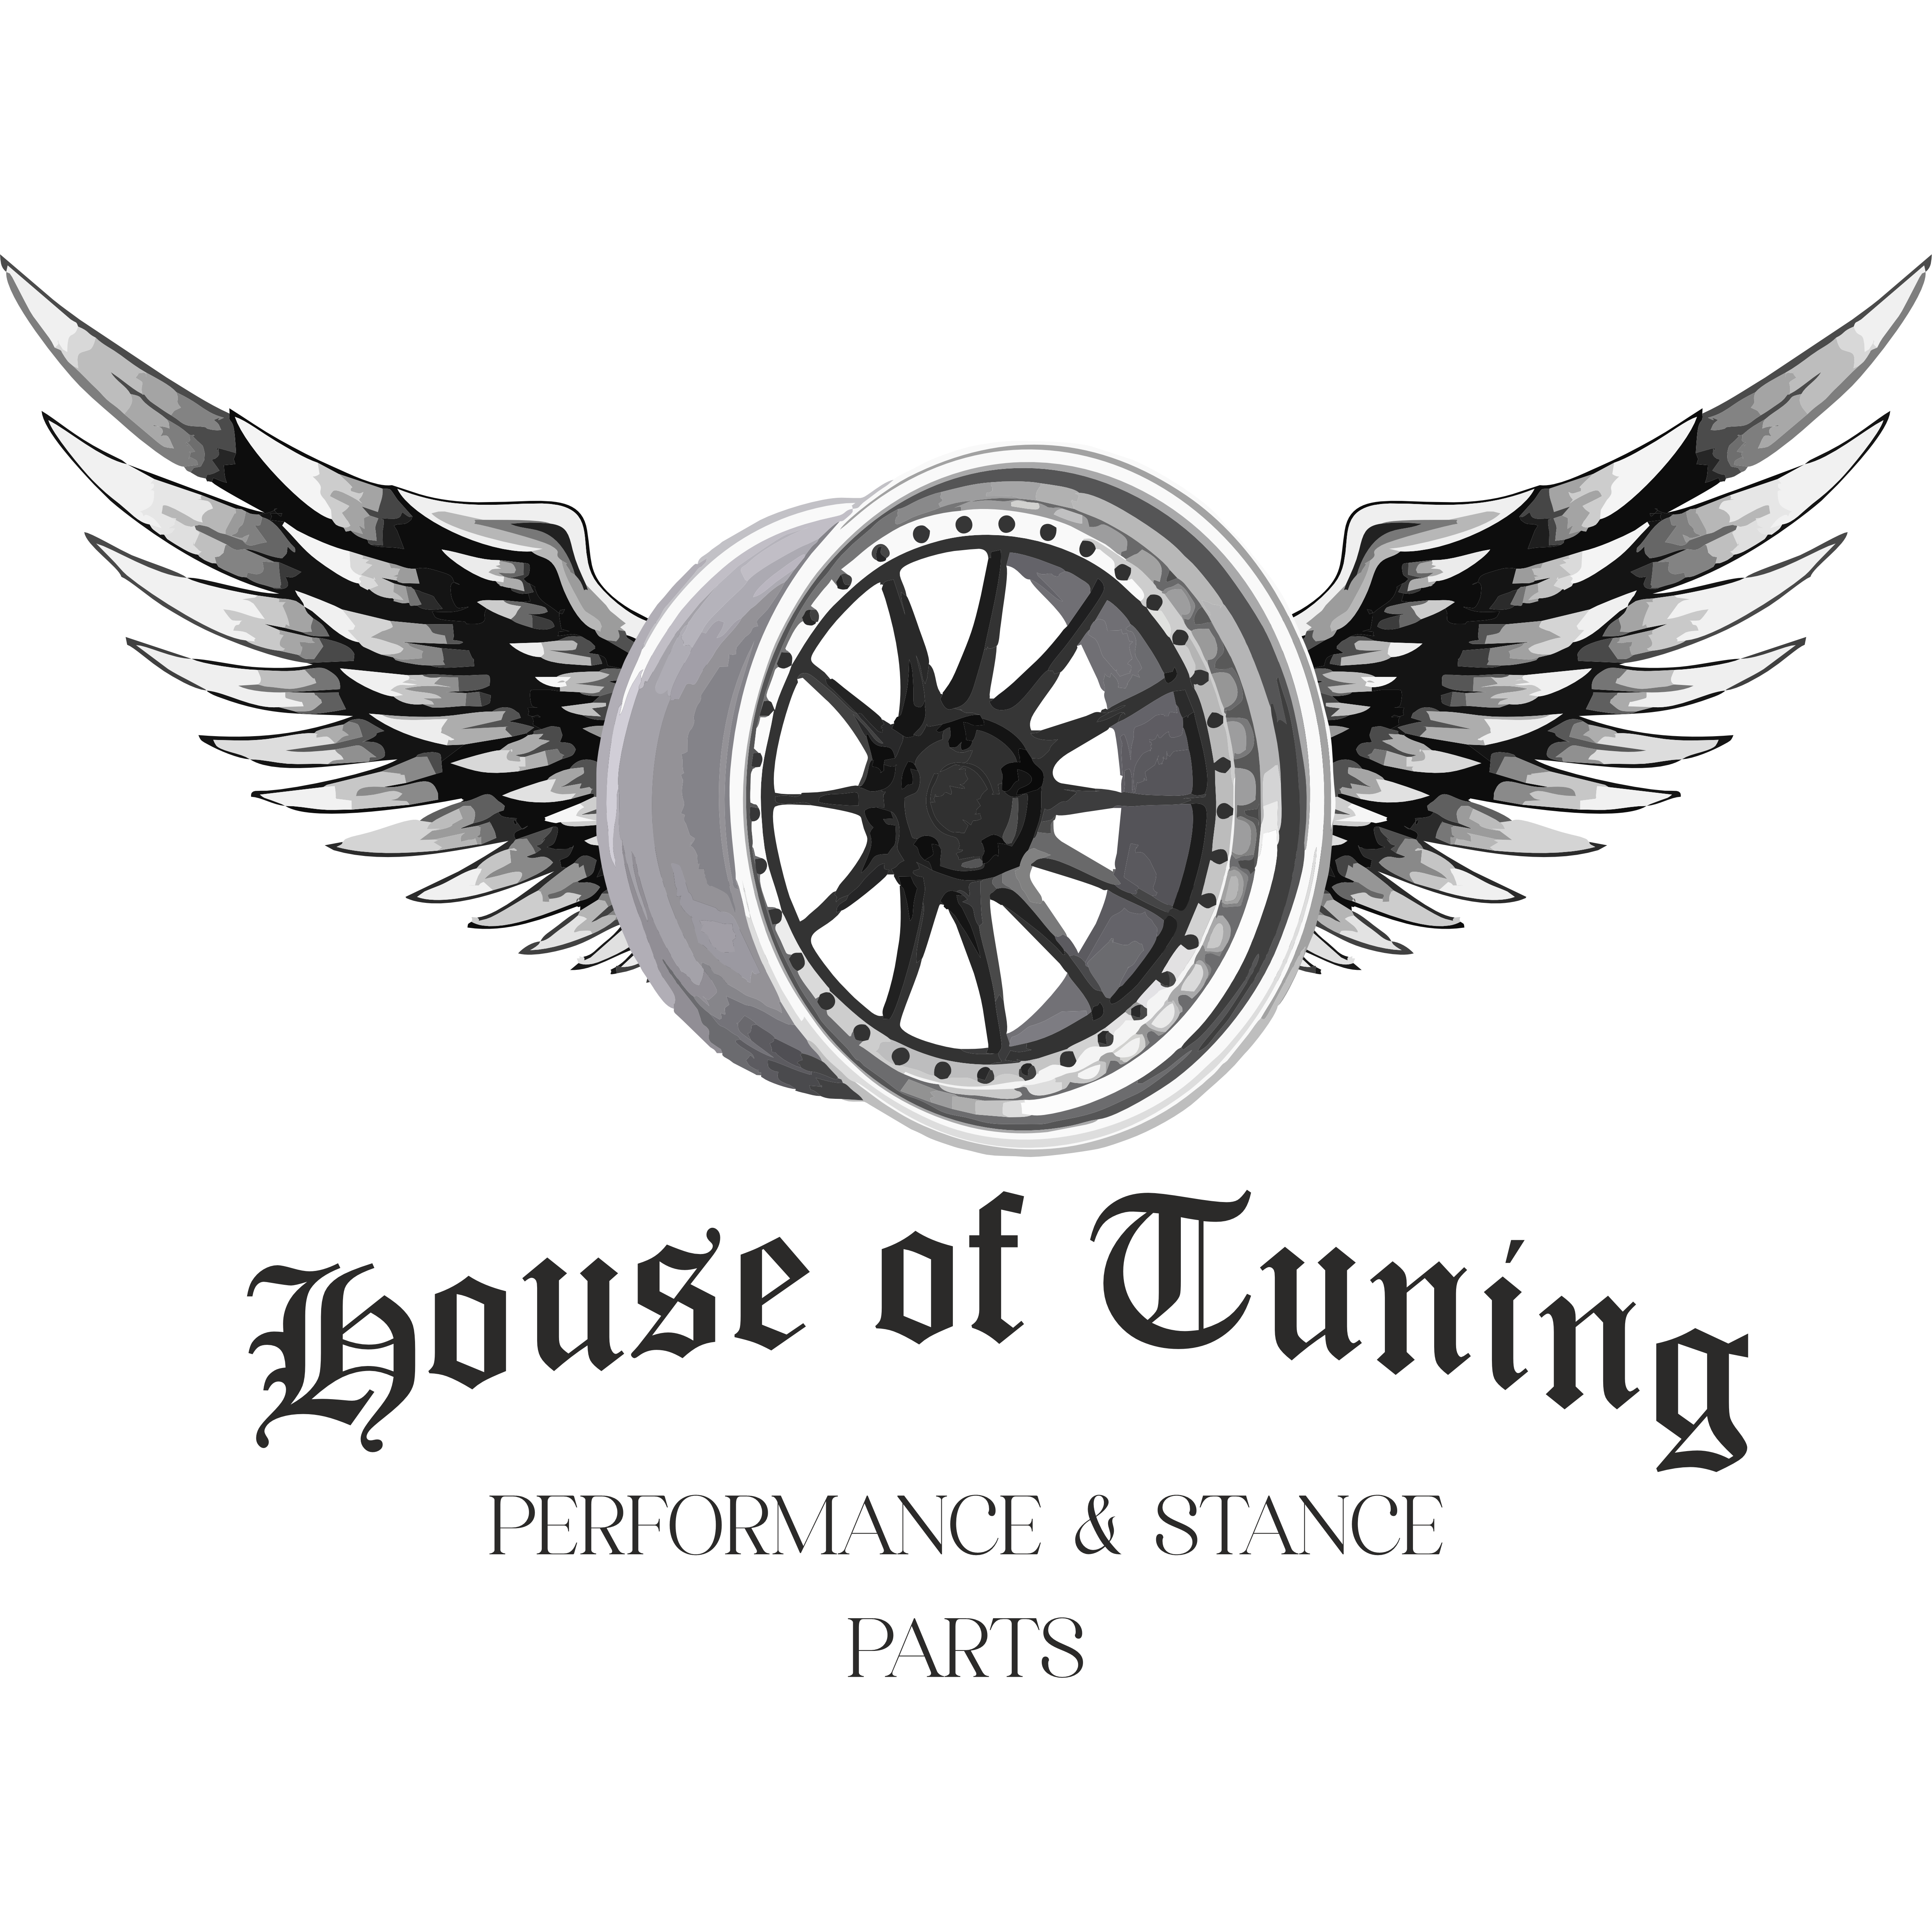 House of Tuning